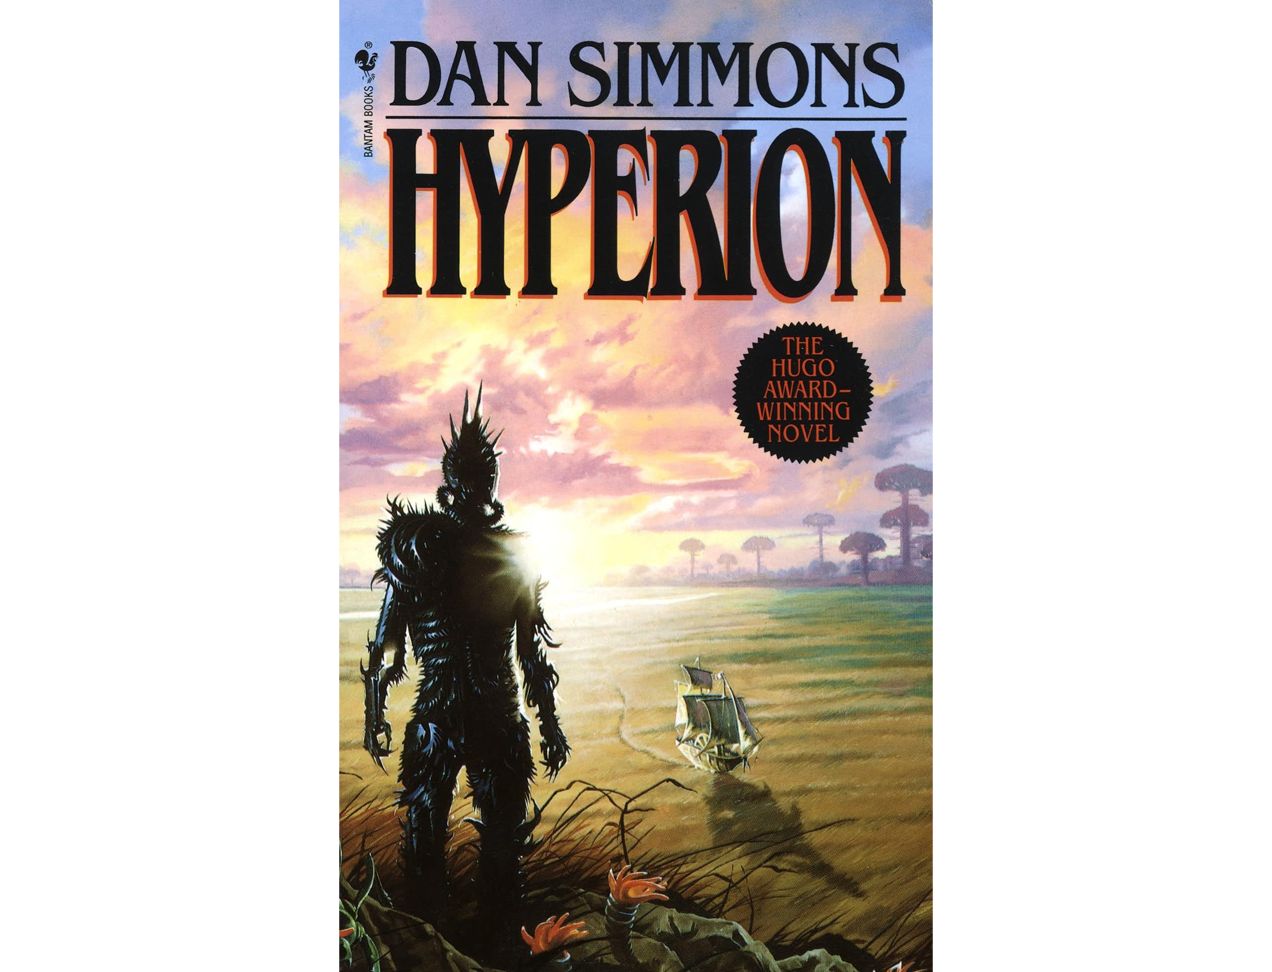 The premise of Autoc, which has some similarities to Dan Simmons’ sequence of space-opera novels, the Hyperion Cantos, sees humanity inevitably re-enacting cycles of colonisation.